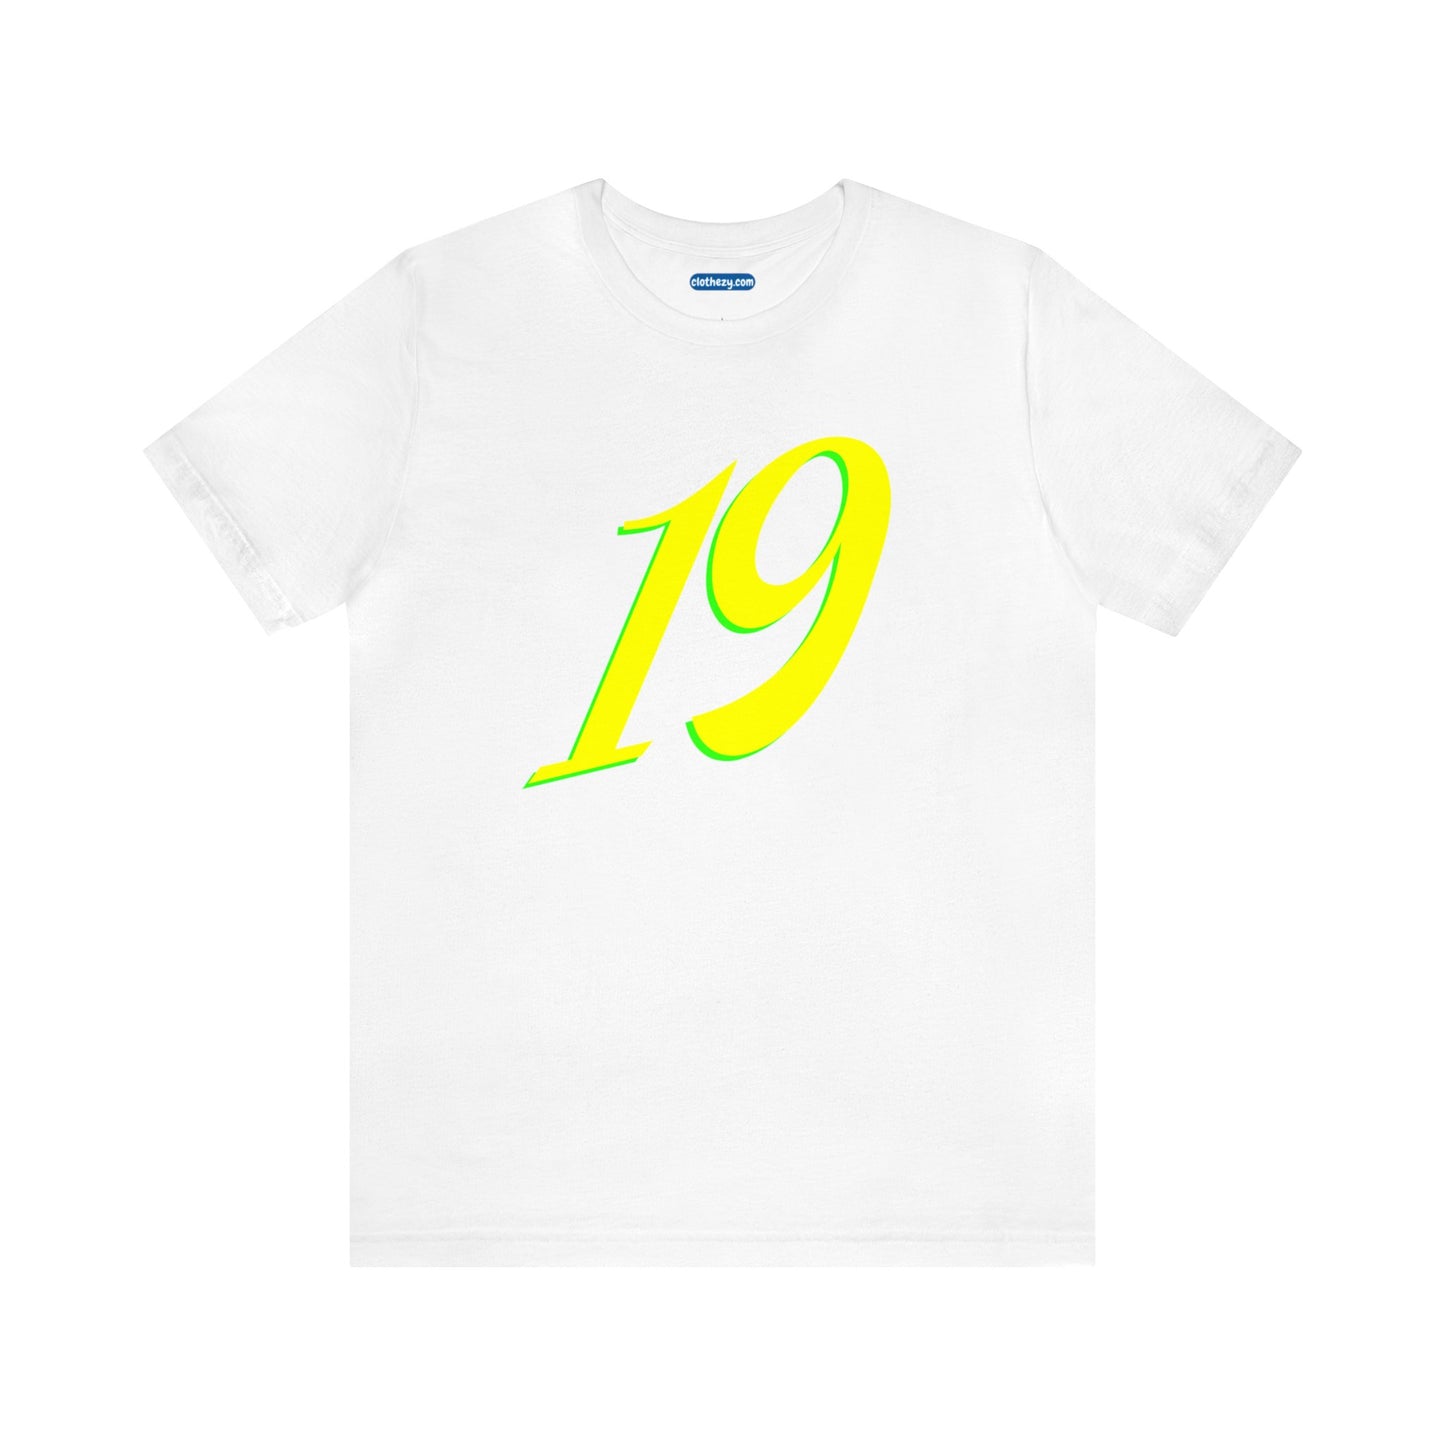 Number 19 Design - Soft Cotton Tee for birthdays and celebrations, Gift for friends and family, Multiple Options by clothezy.com in White Size Small - Buy Now